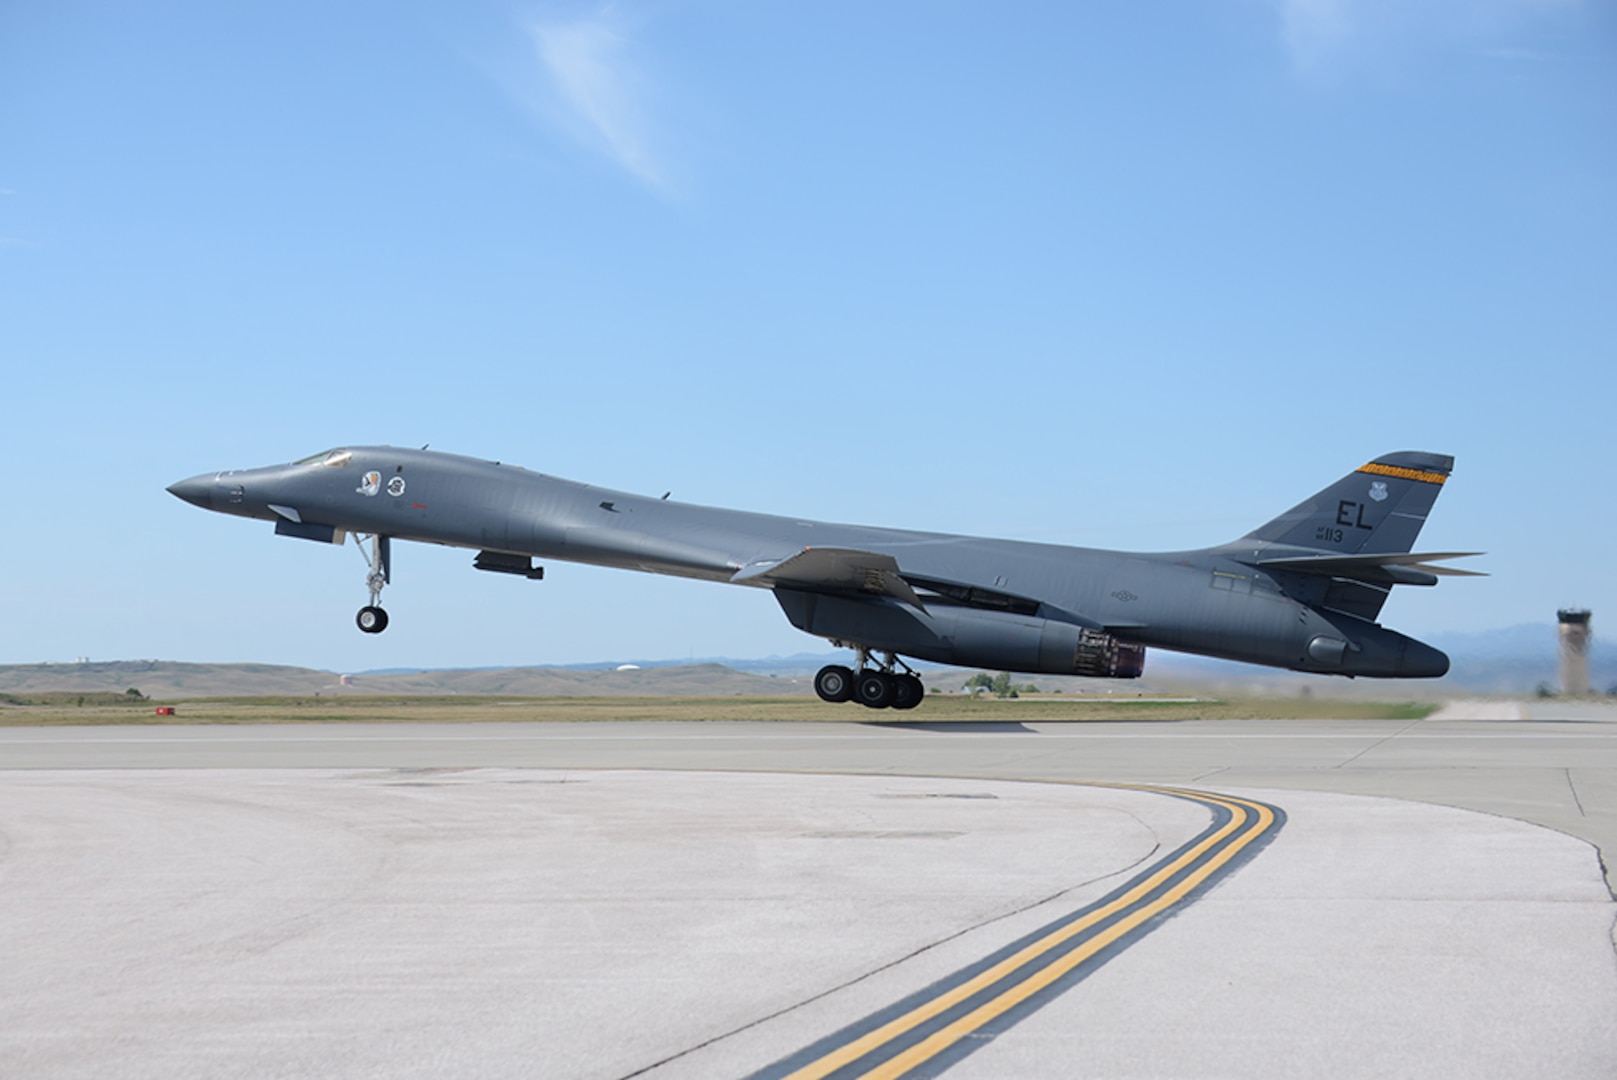 A B-1 bomber takes flight at Ellsworth Air Force Base (AFB), S.D., Aug. 5, 2016, as part of a deployment to Andersen AFB, Guam. More than 300 Airmen from the 28th Bomb Wing have deployed to Andersen AFB, Guam, in support of U.S. Pacific Command’s continuous bomber presence mission.